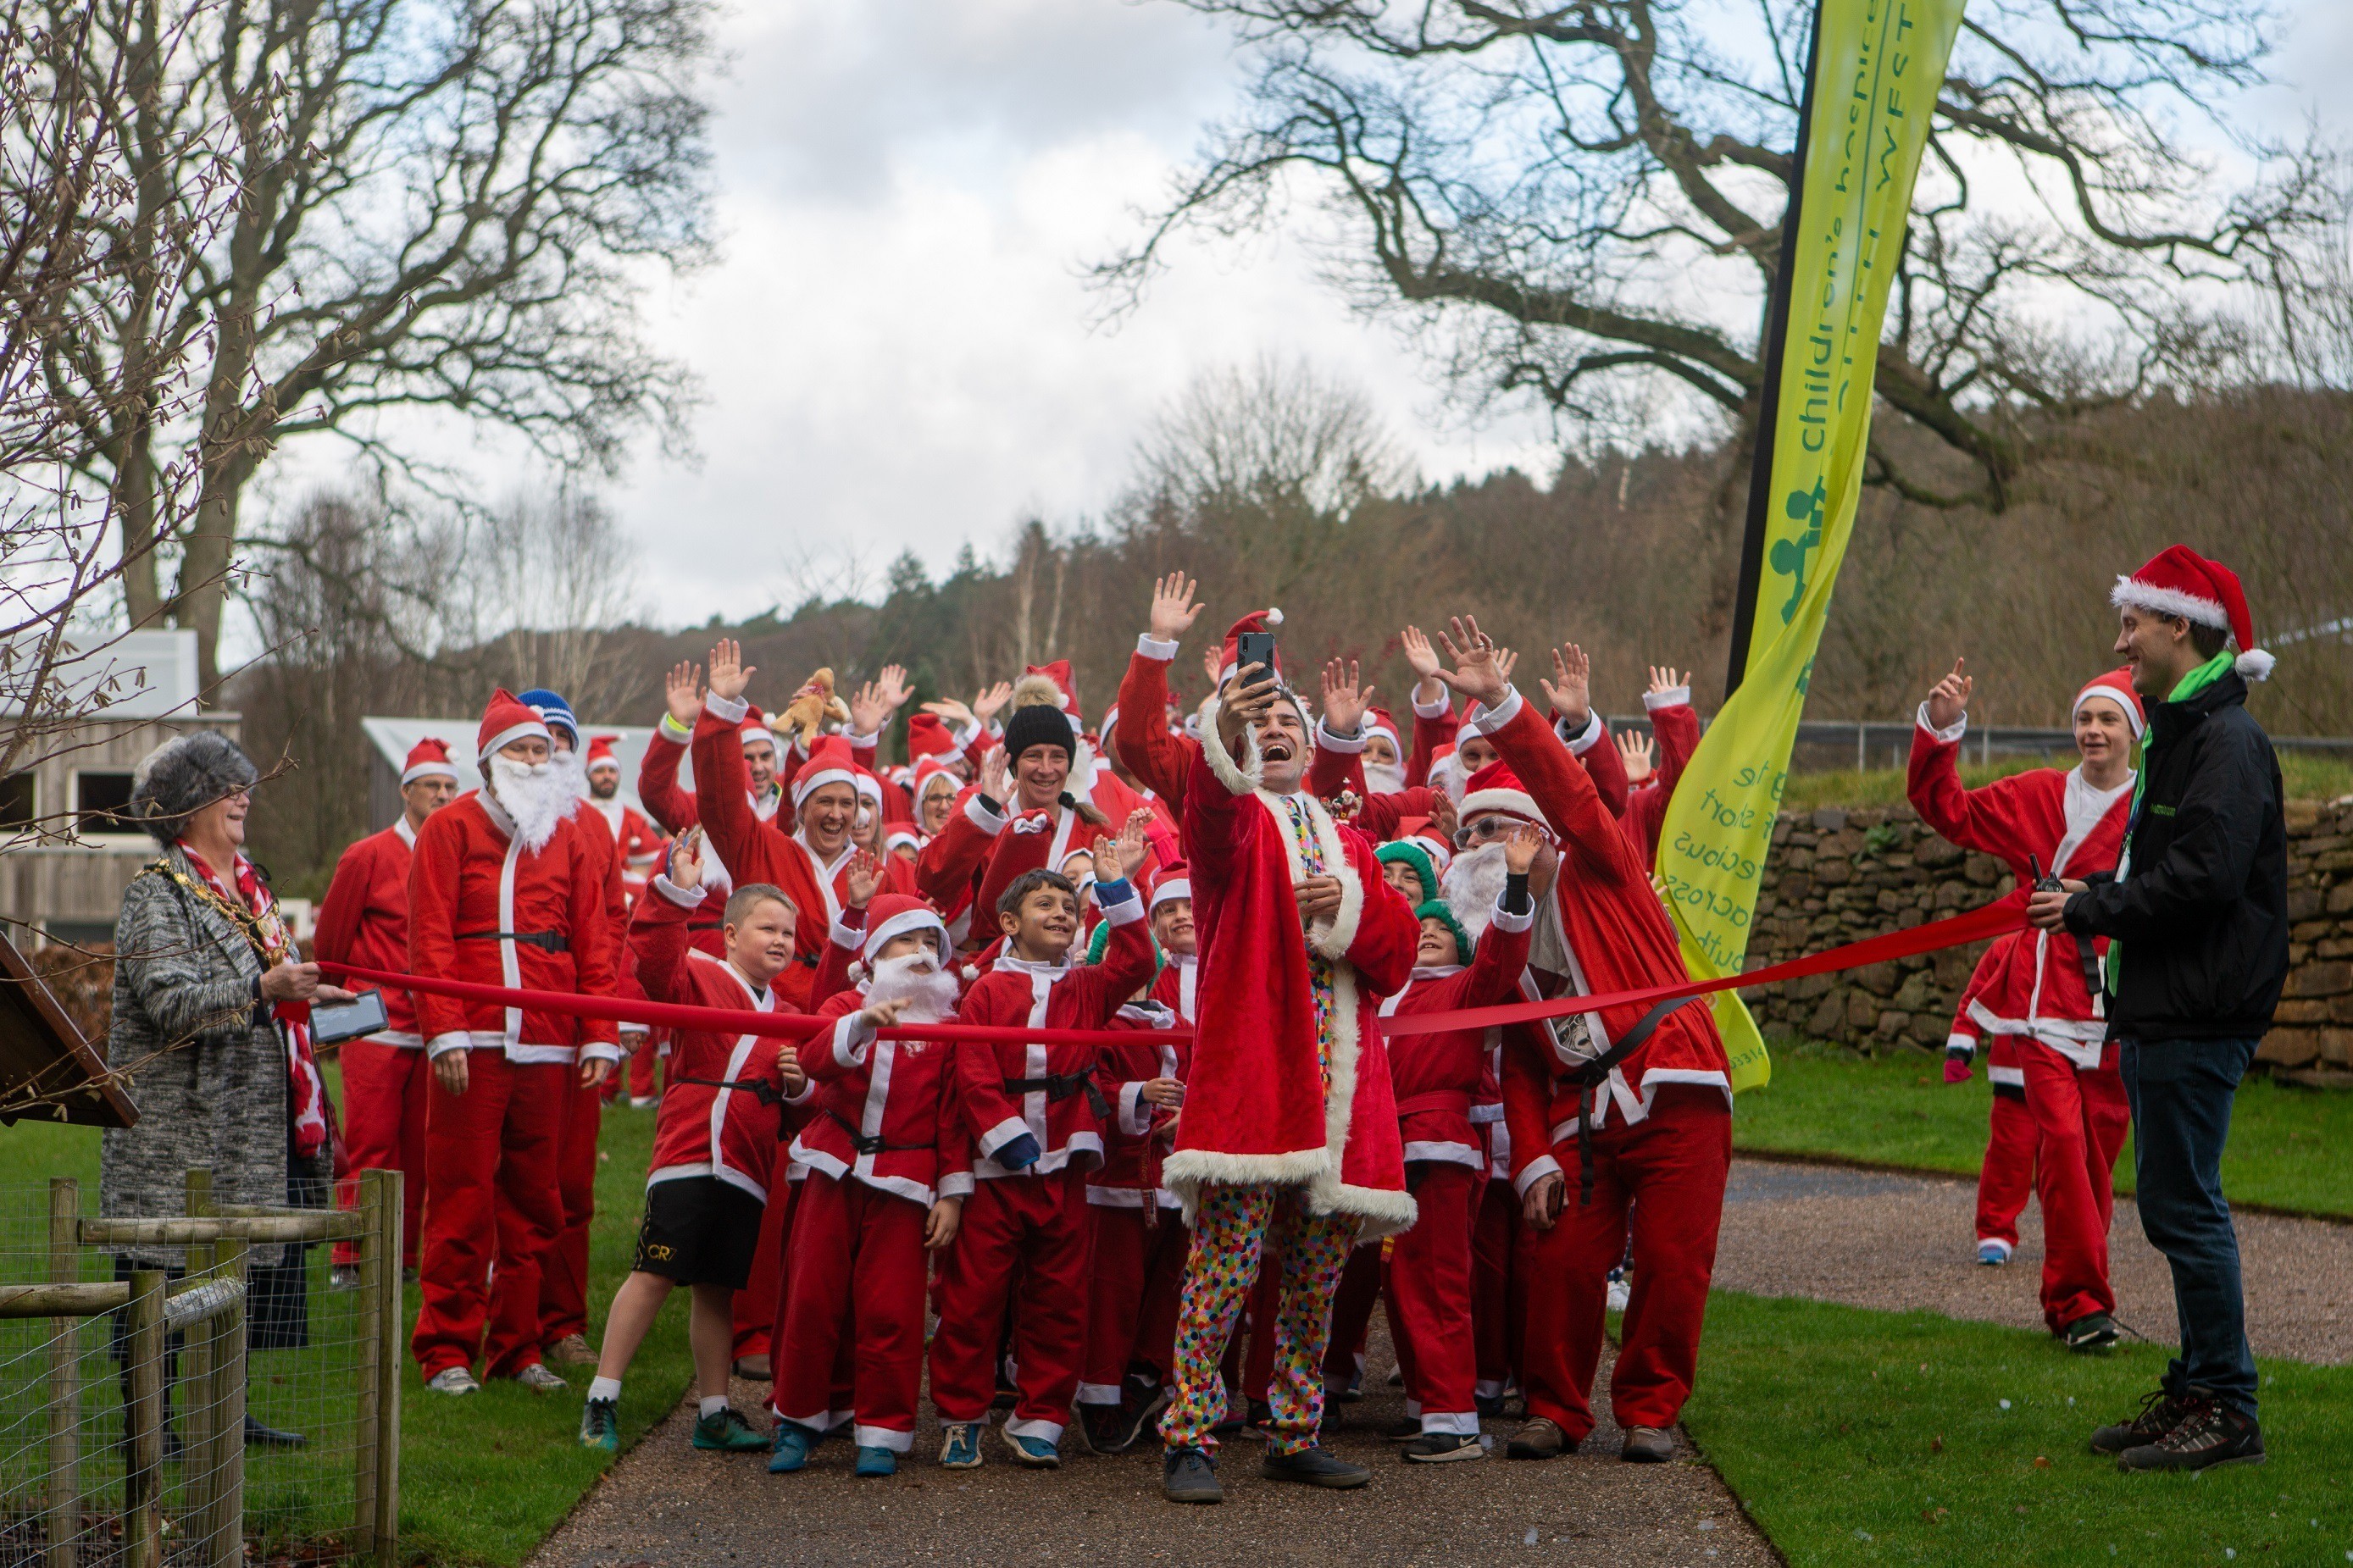 On the start line at last year’s Santas on the Run event at RHS Garden Rosemoor. Picture: Tim Lamerton